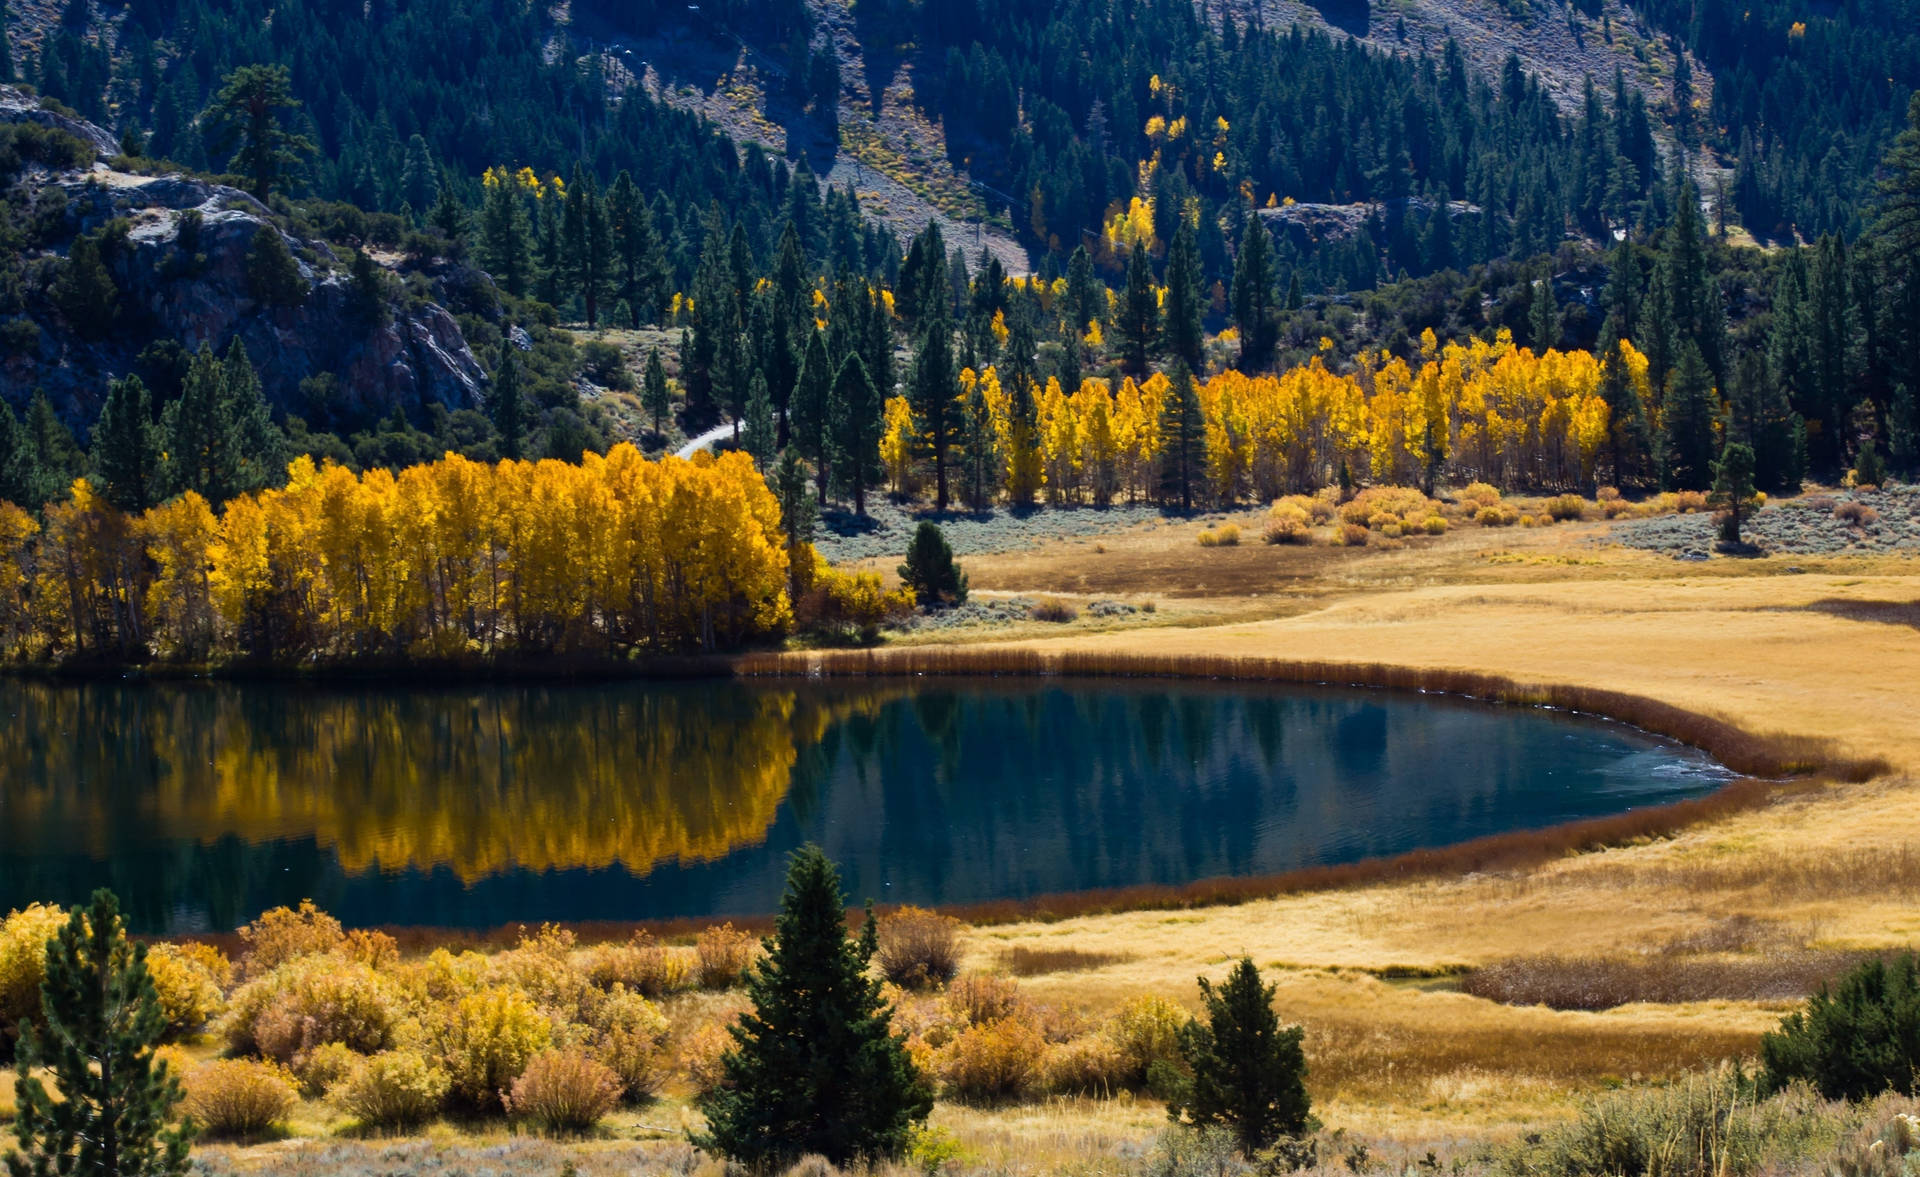 Find bliss in the beauty of Autumn with a hike in the mountains Wallpaper